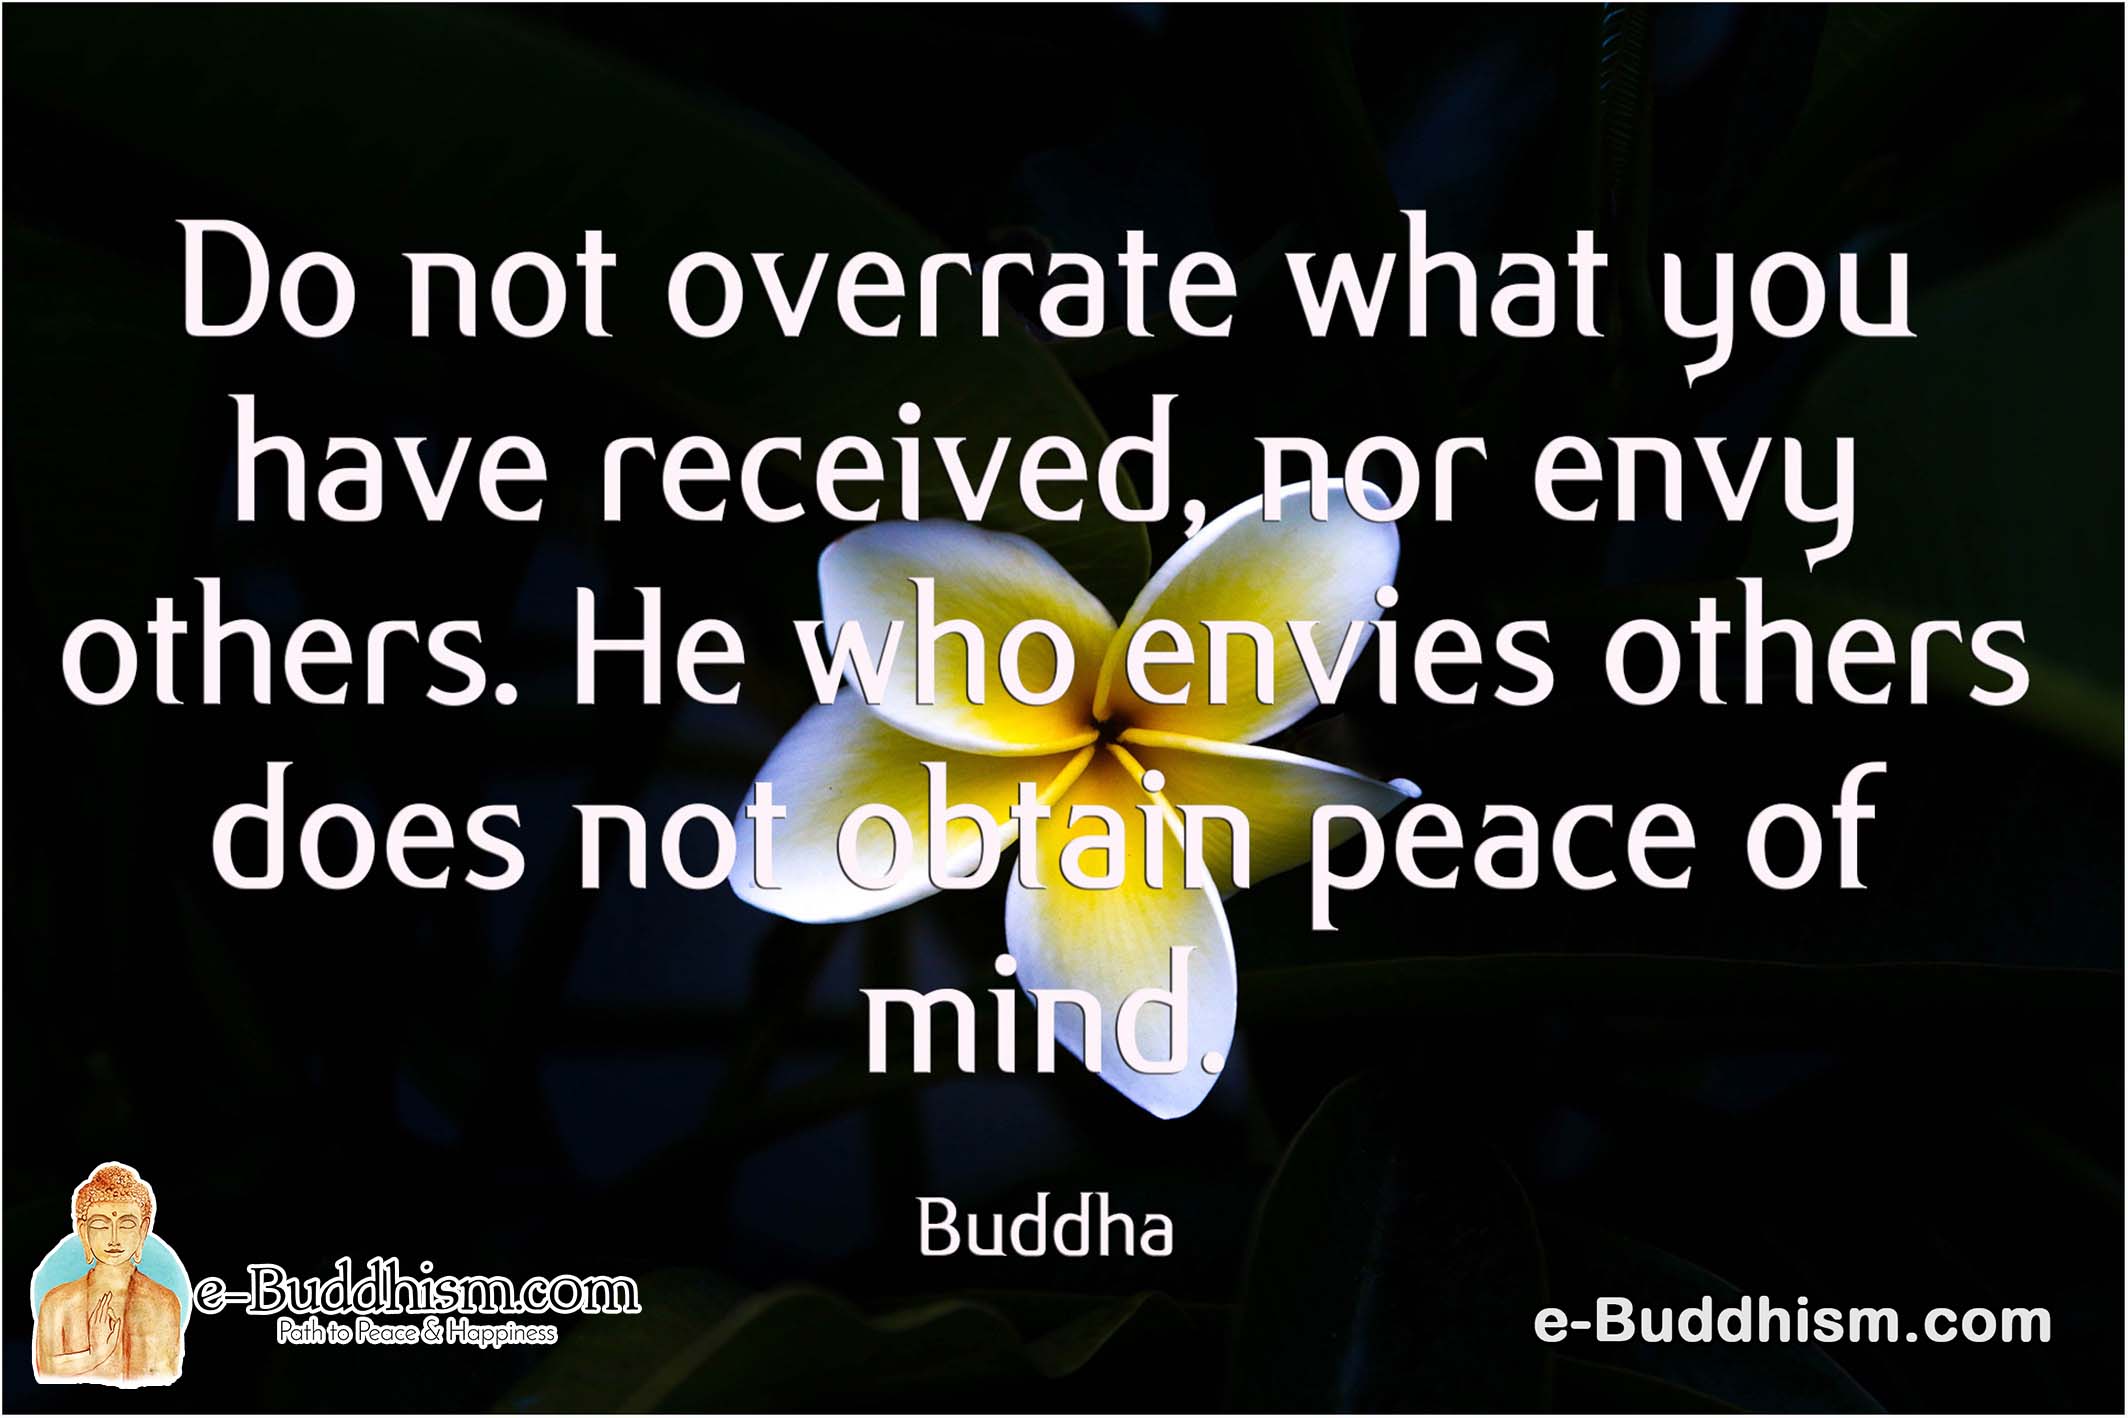 Do not overrate what you have received, nor envy others. He who envies others does not obtain peace of mind. Buddha